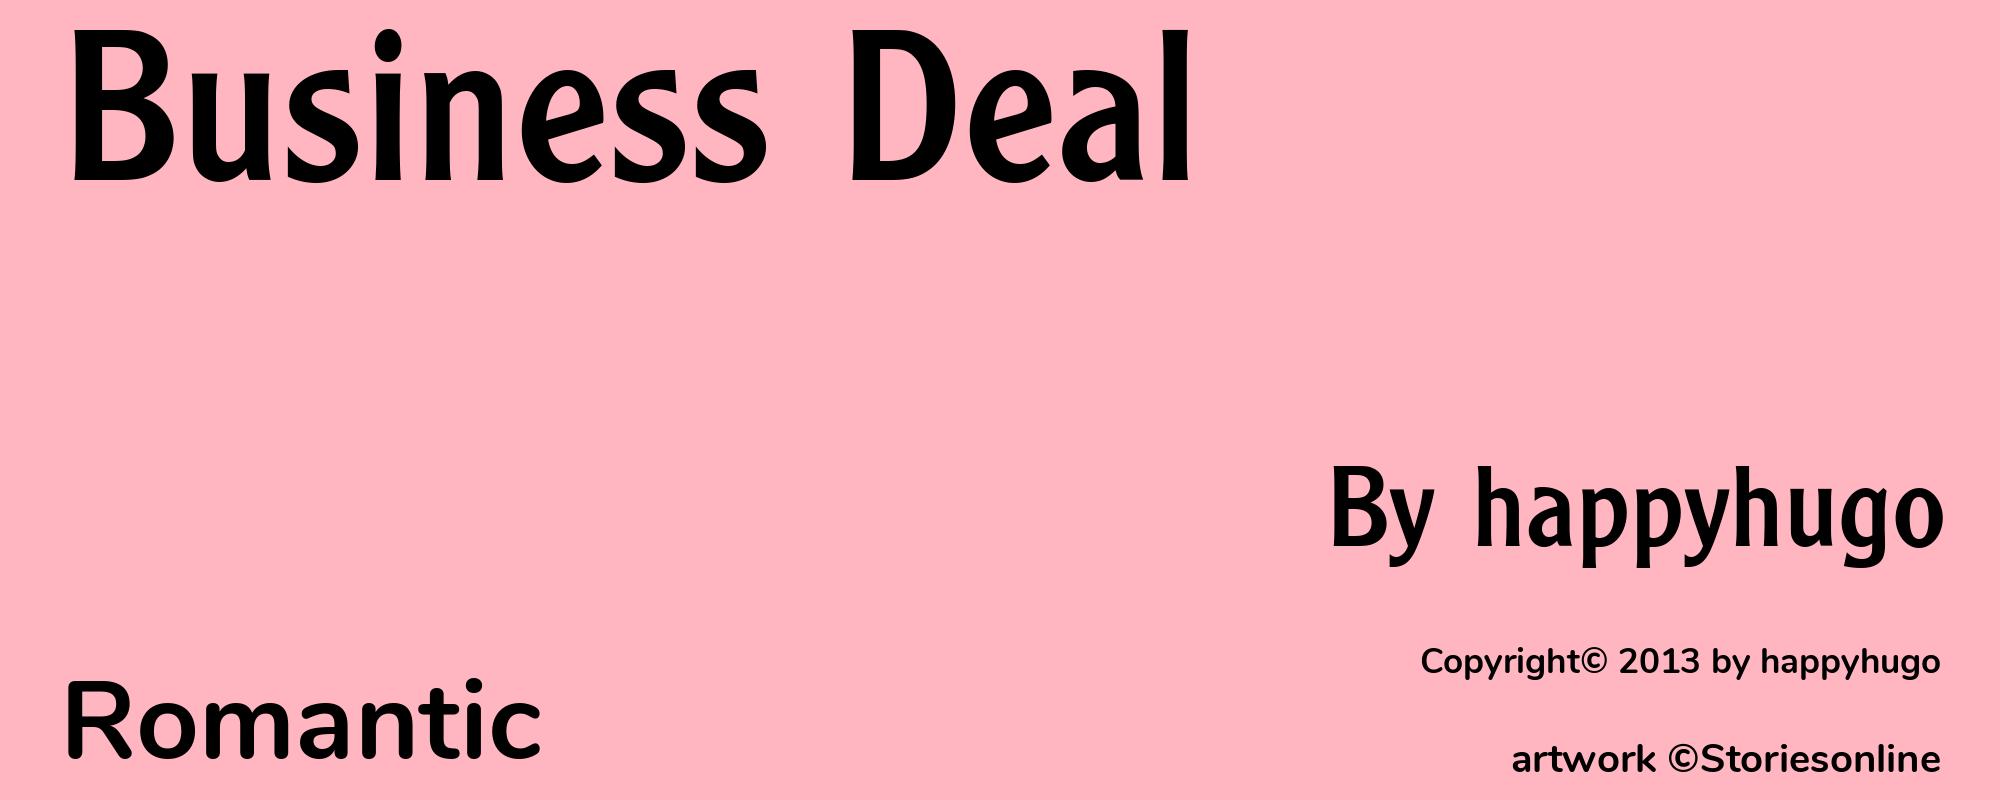 Business Deal - Cover